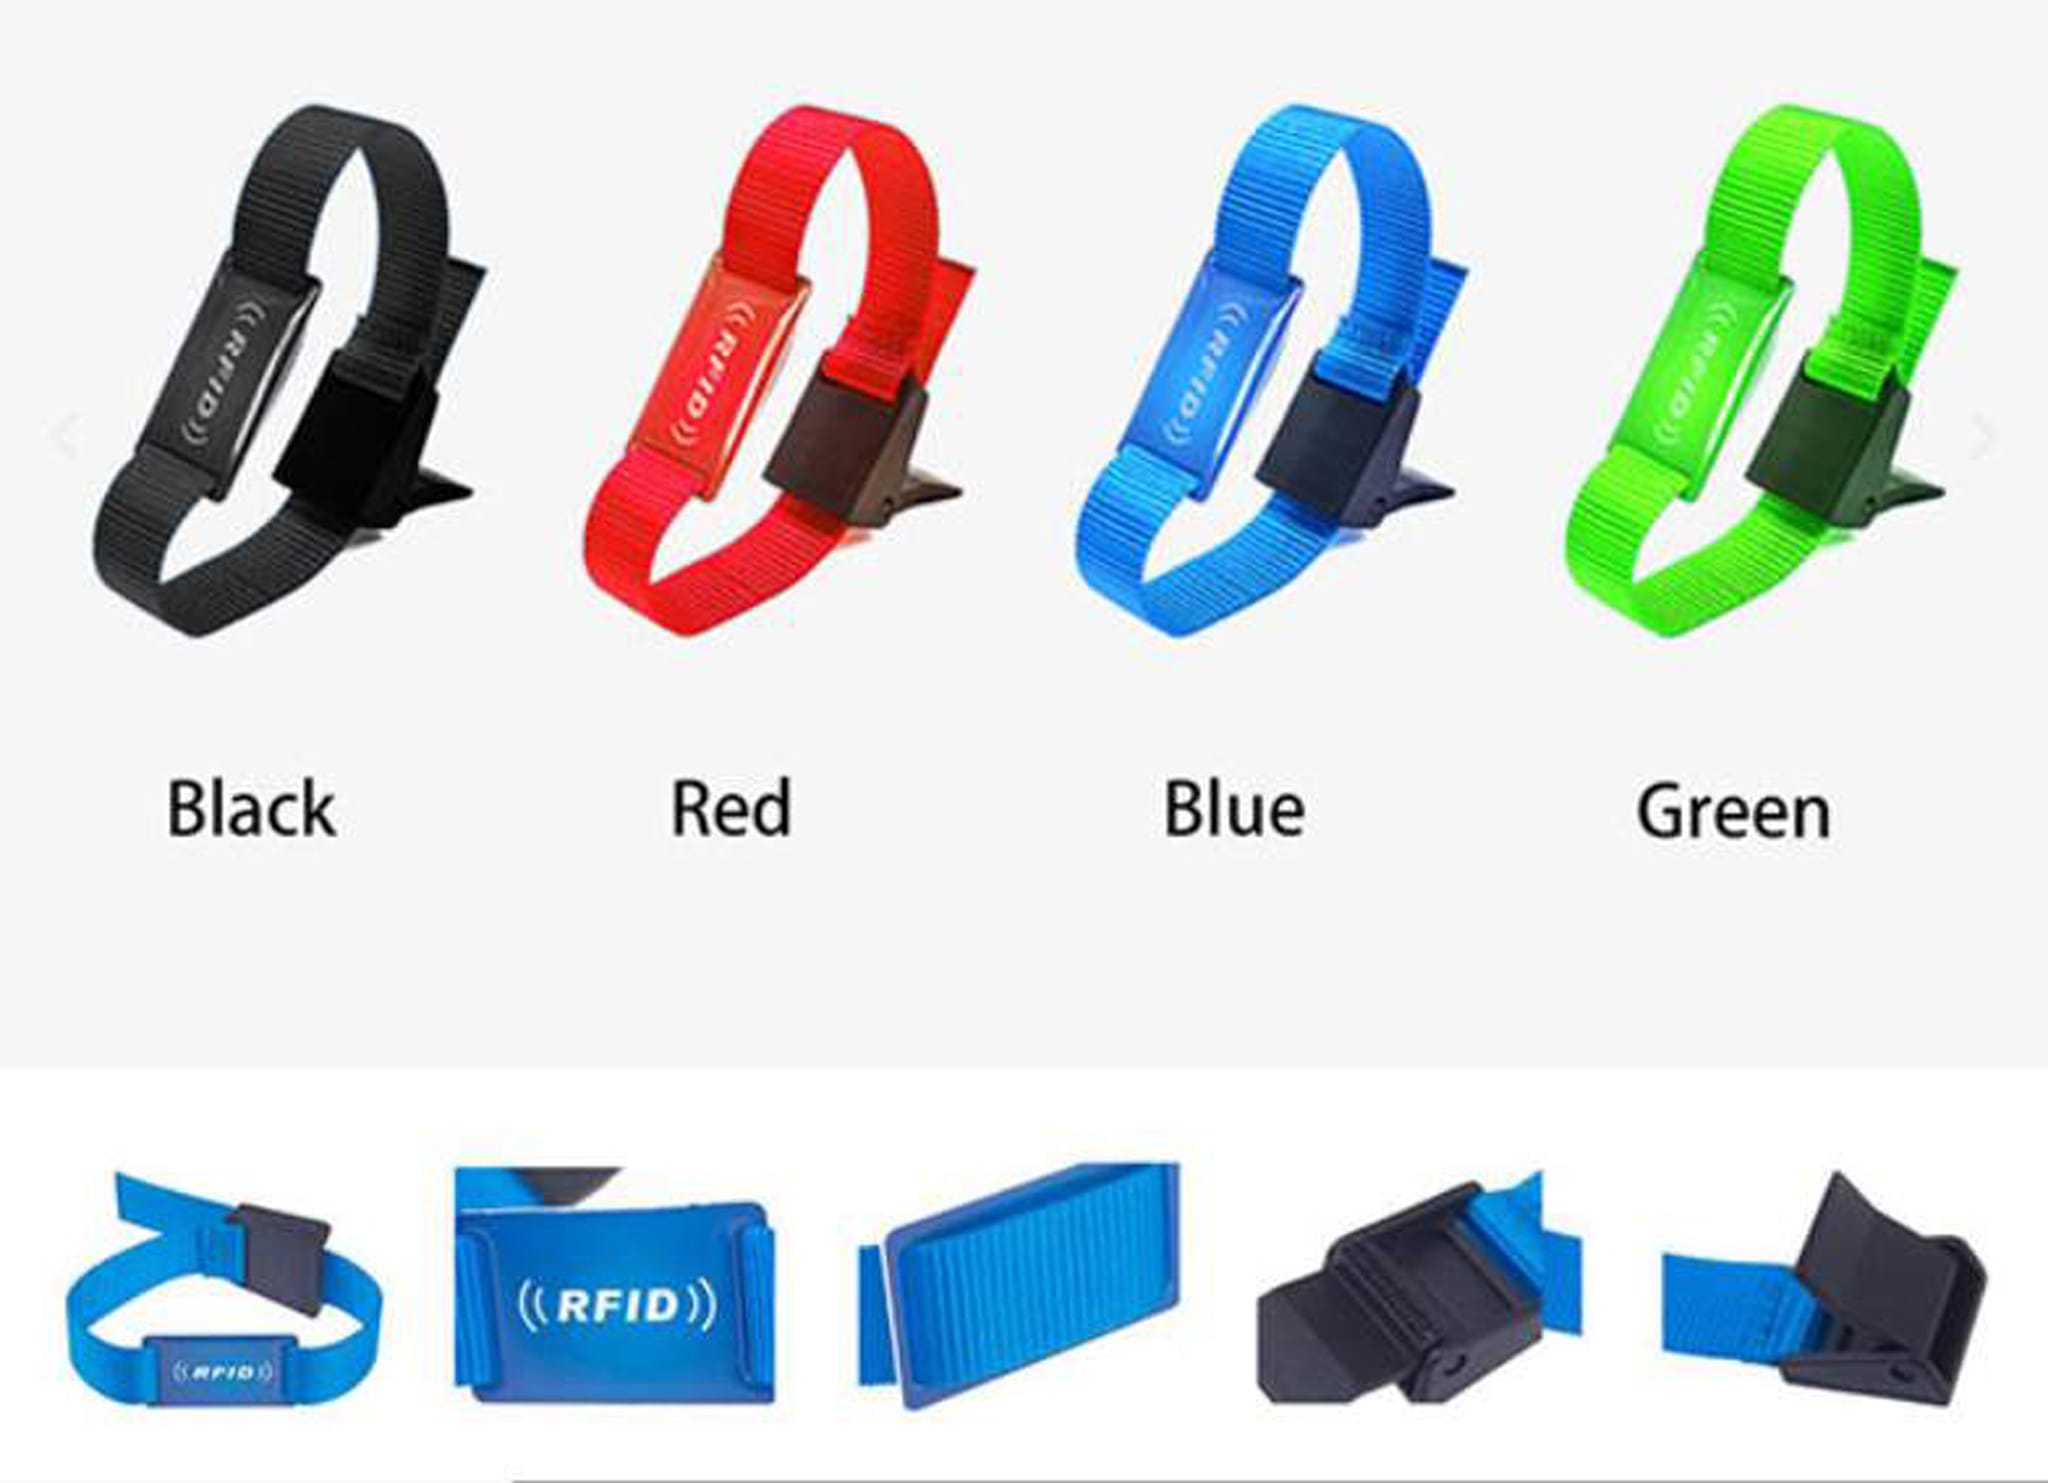 RFID nylon wrist bands from eCardz for schools and education NZ